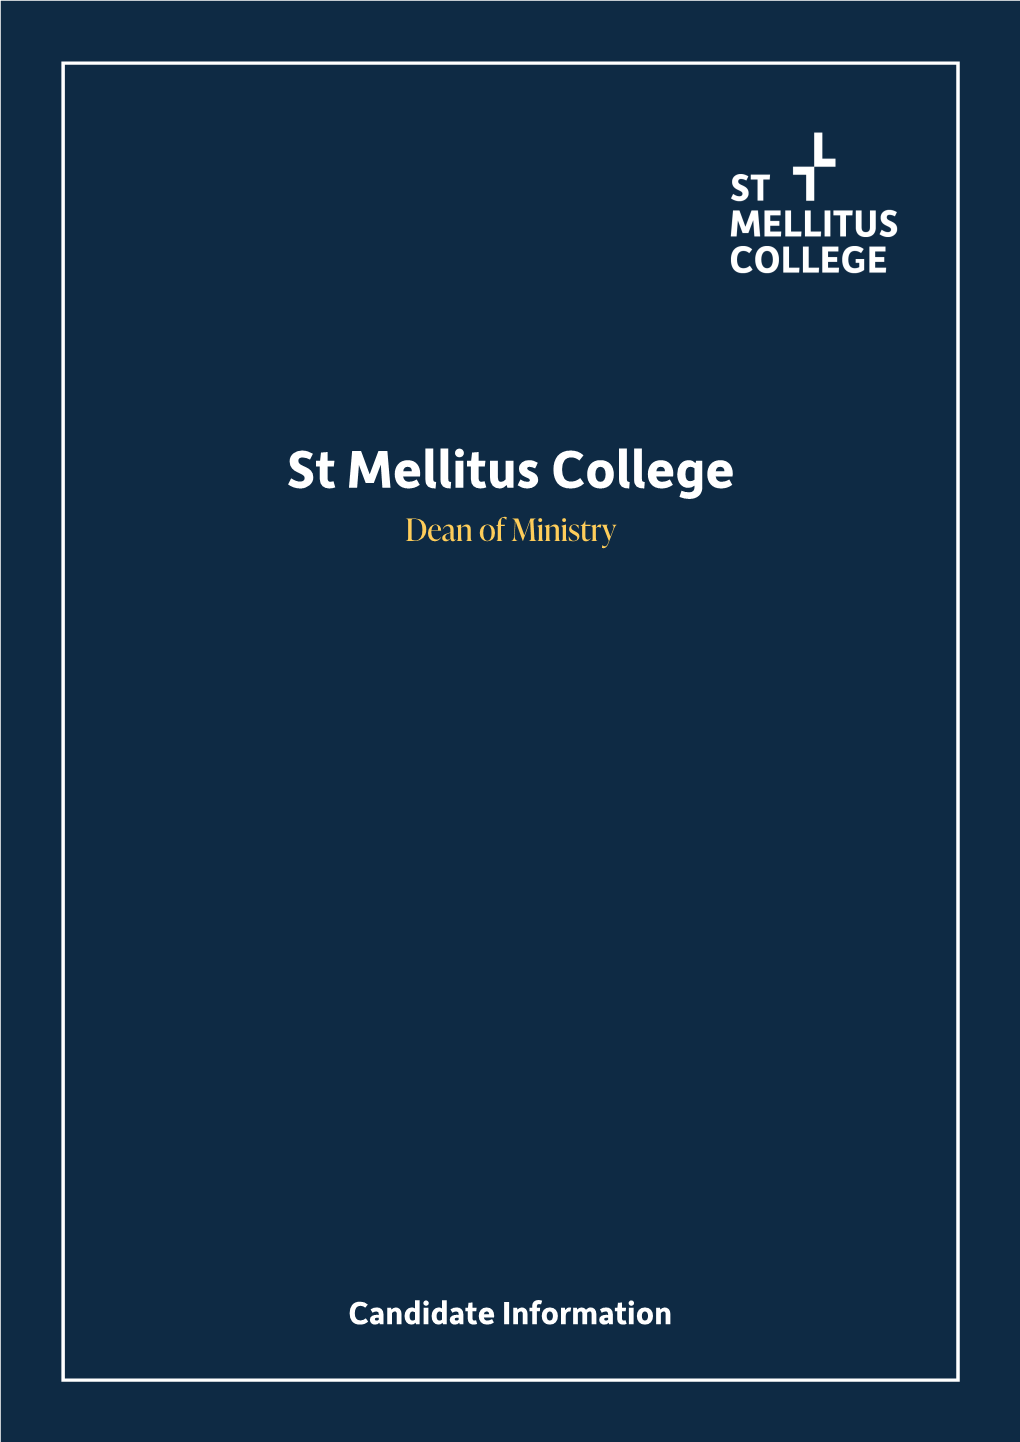 St Mellitus College Dean of Ministry